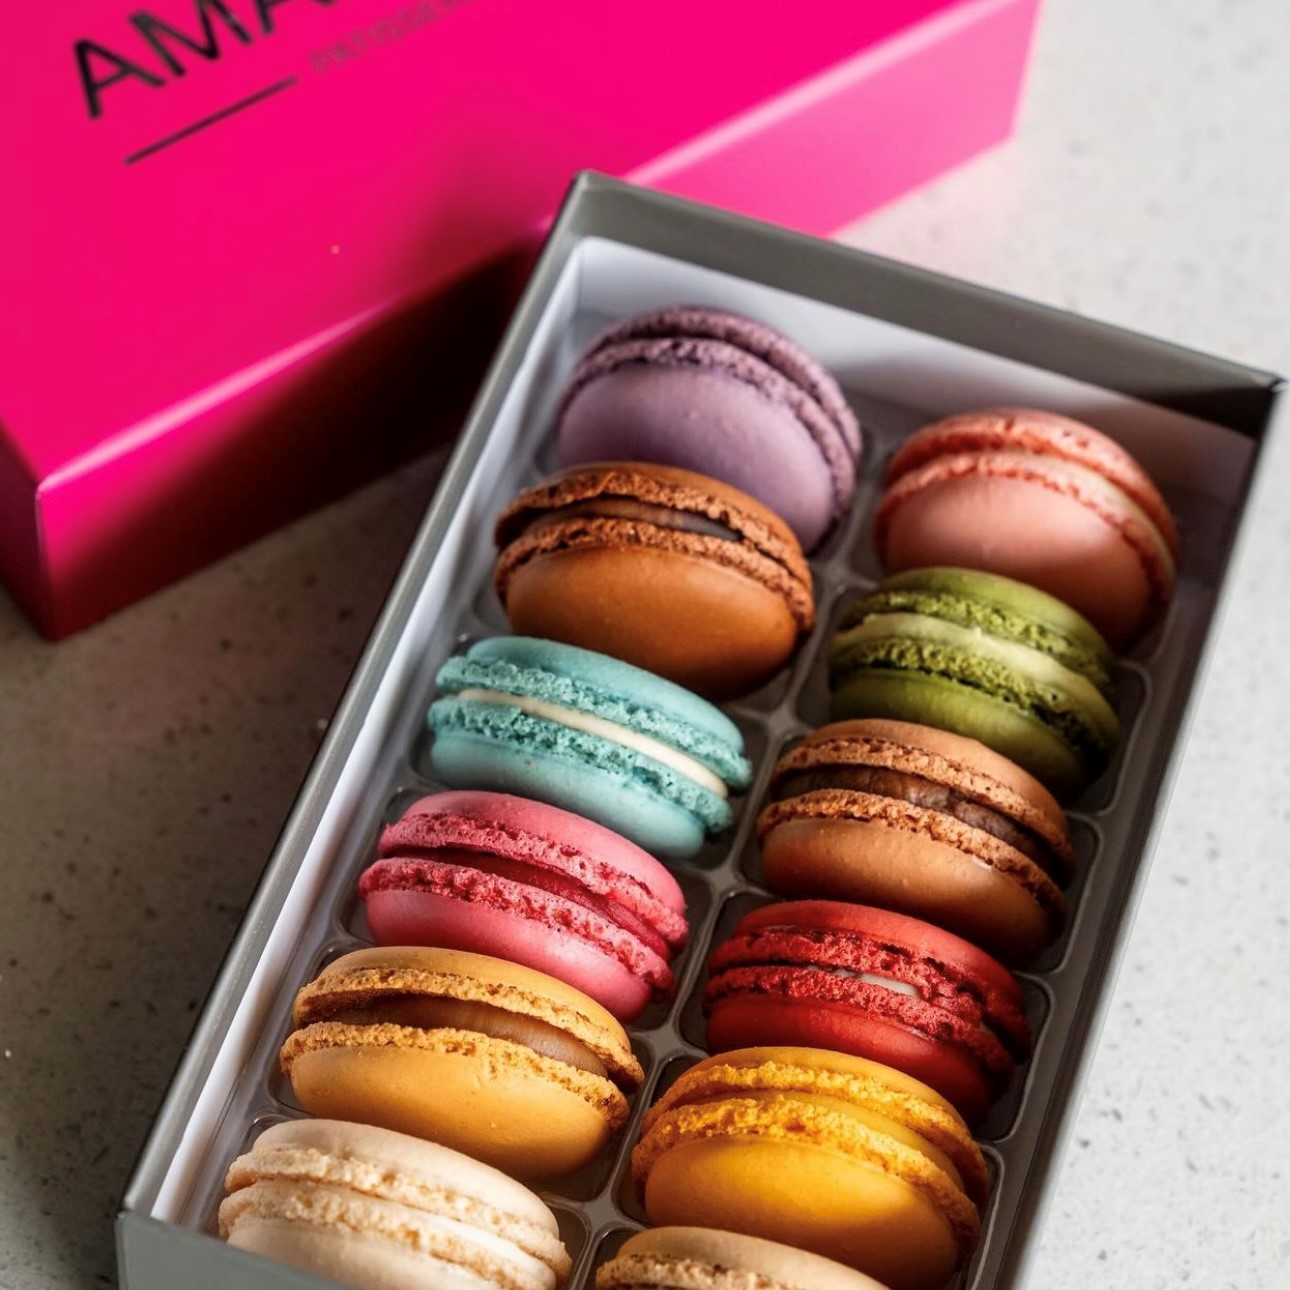 Variety of macarons from Amadeus Patisserie